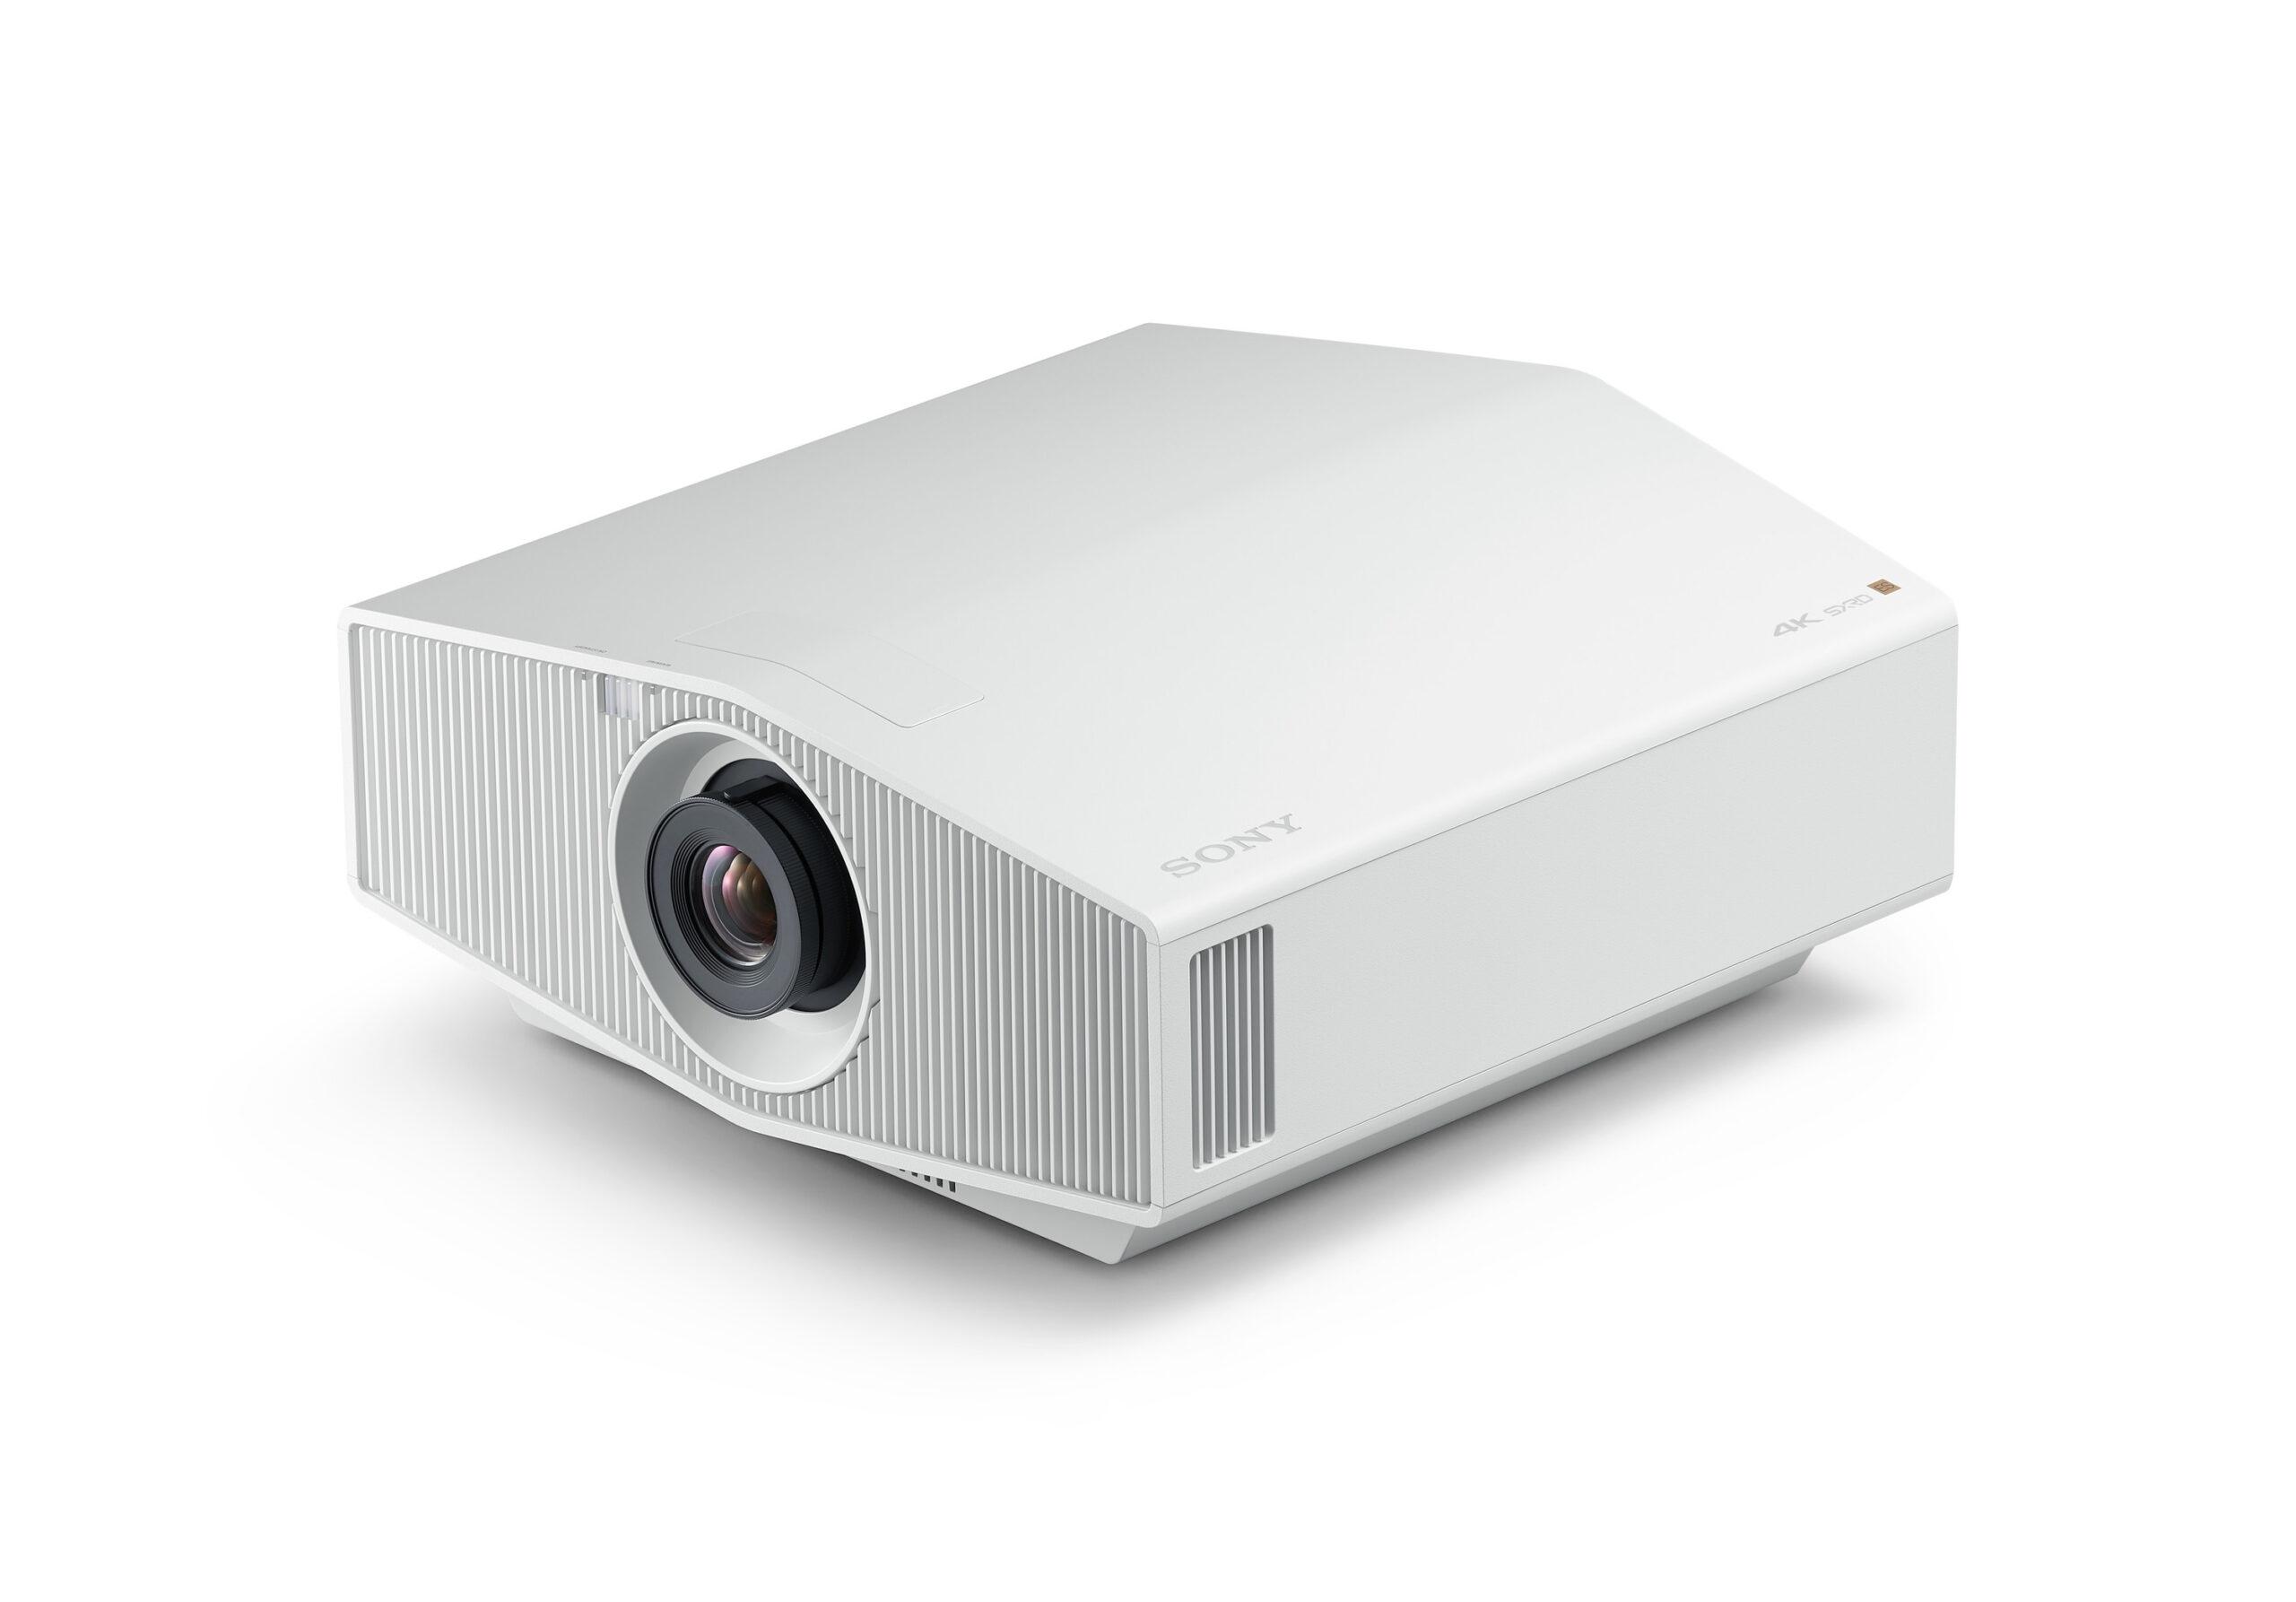 This is no mere annual refresh. Sony's three new home theater projectors are a generational leap forward. f458a9fc vplxw5000 others 220201 014 large scaled